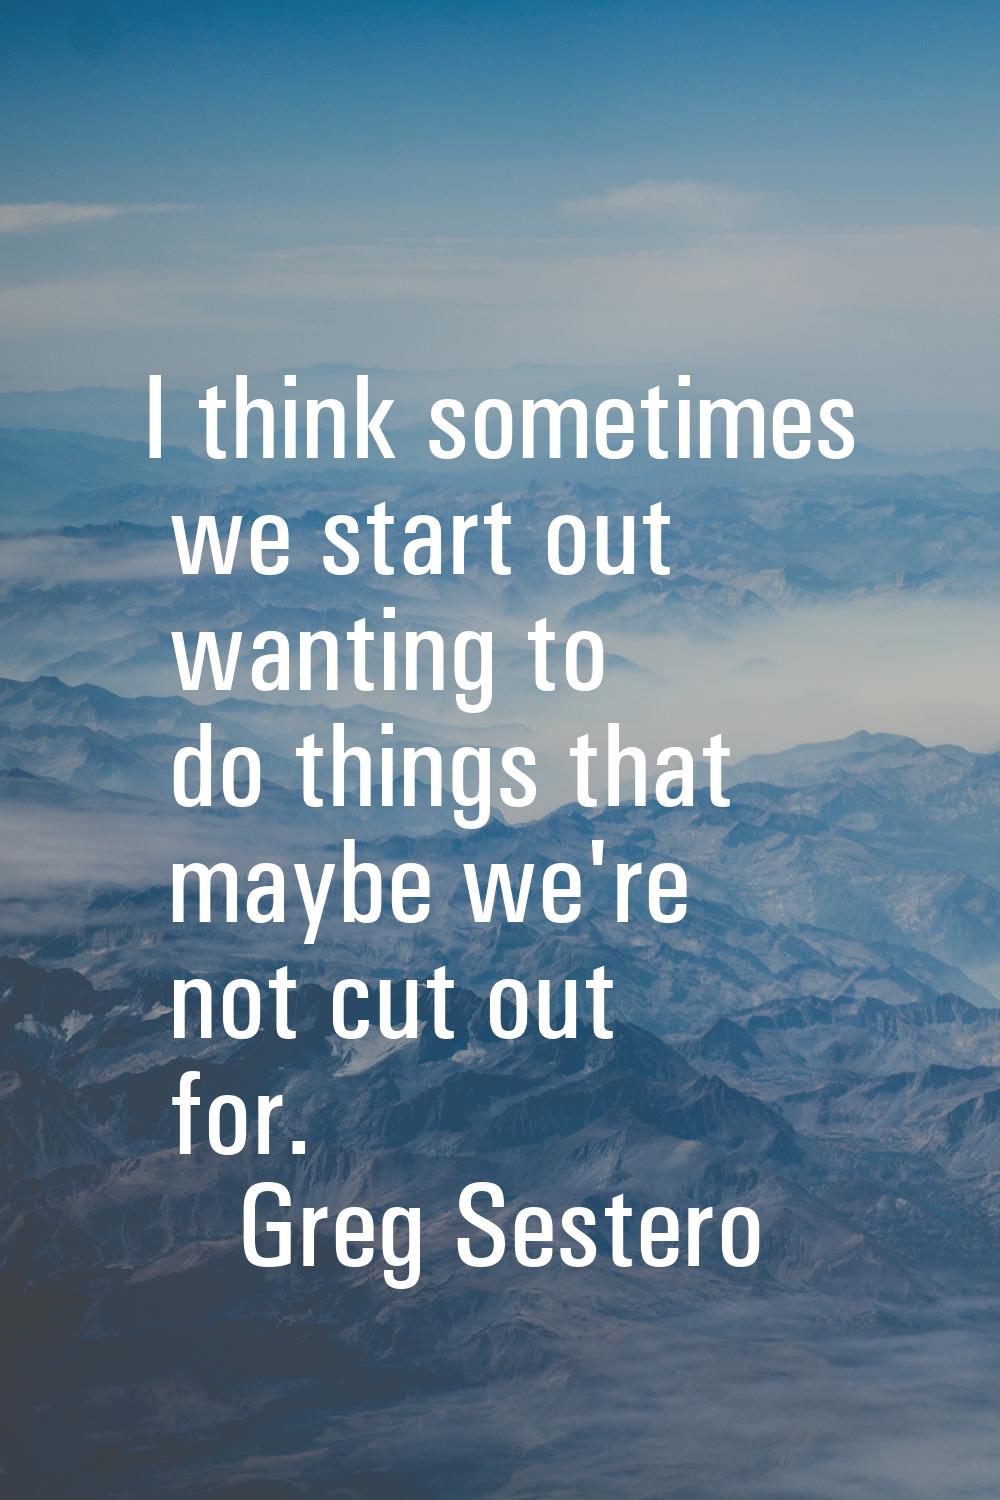 I think sometimes we start out wanting to do things that maybe we're not cut out for.